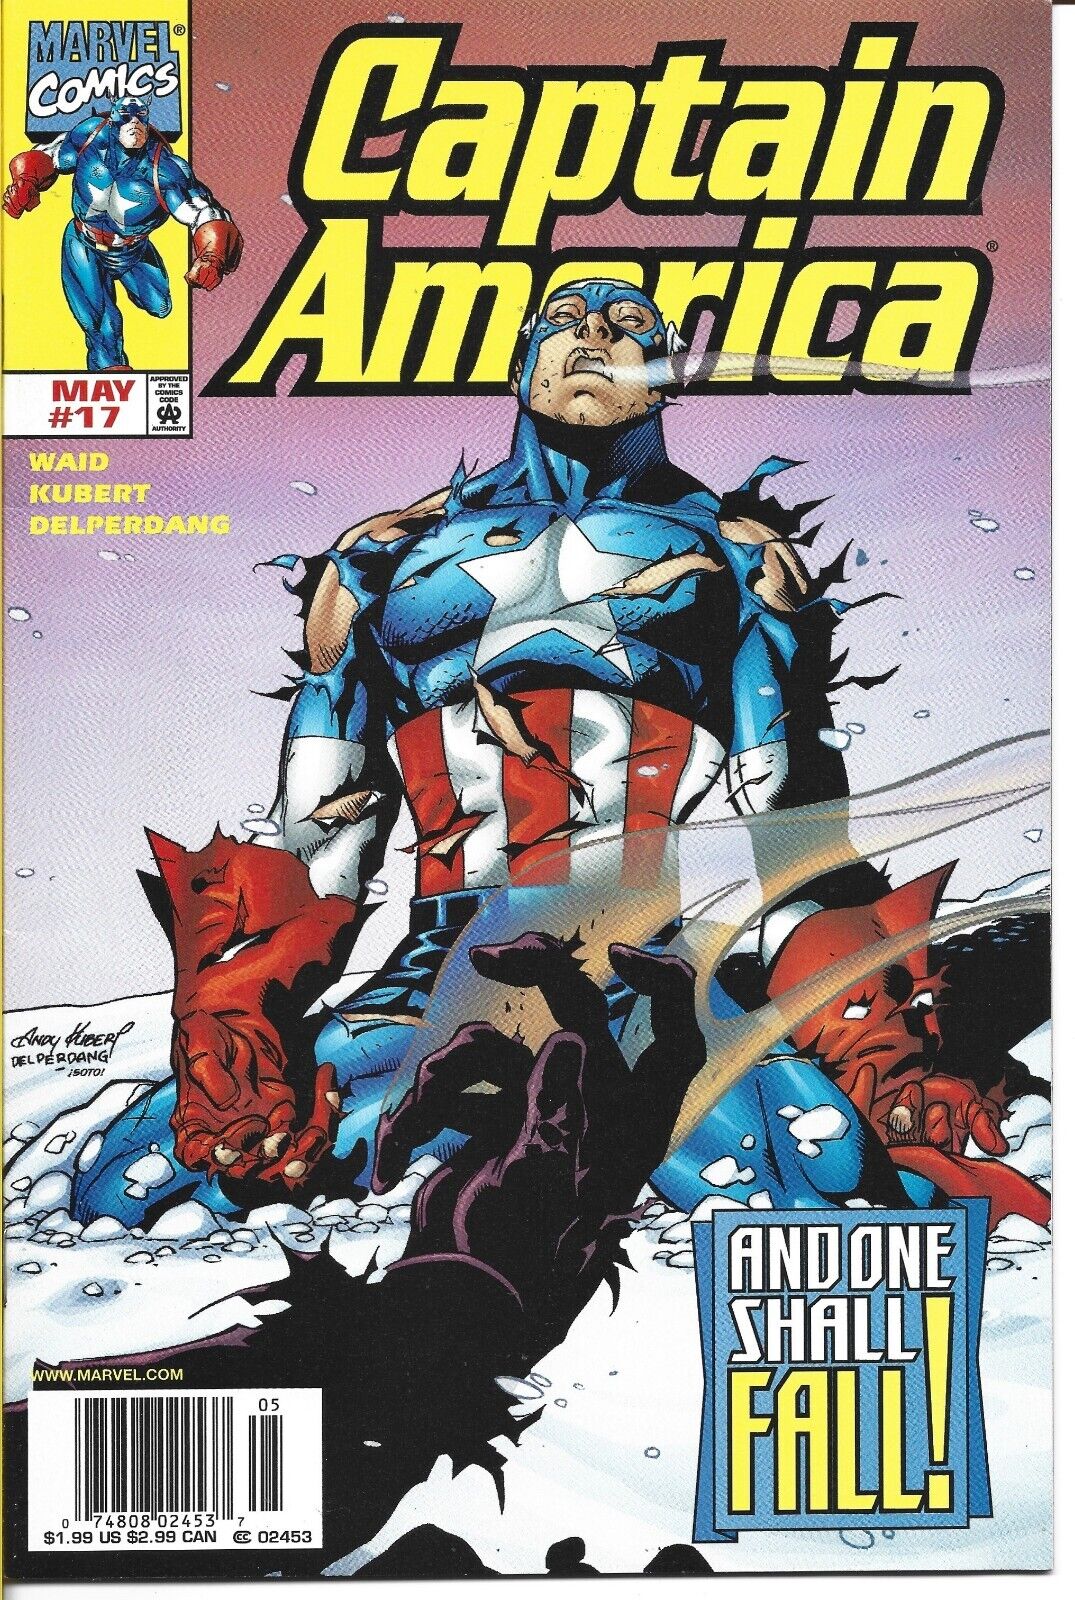 CAPTAIN AMERICA #17 MARVEL COMICS 1999 BAGGED AND BOARDED